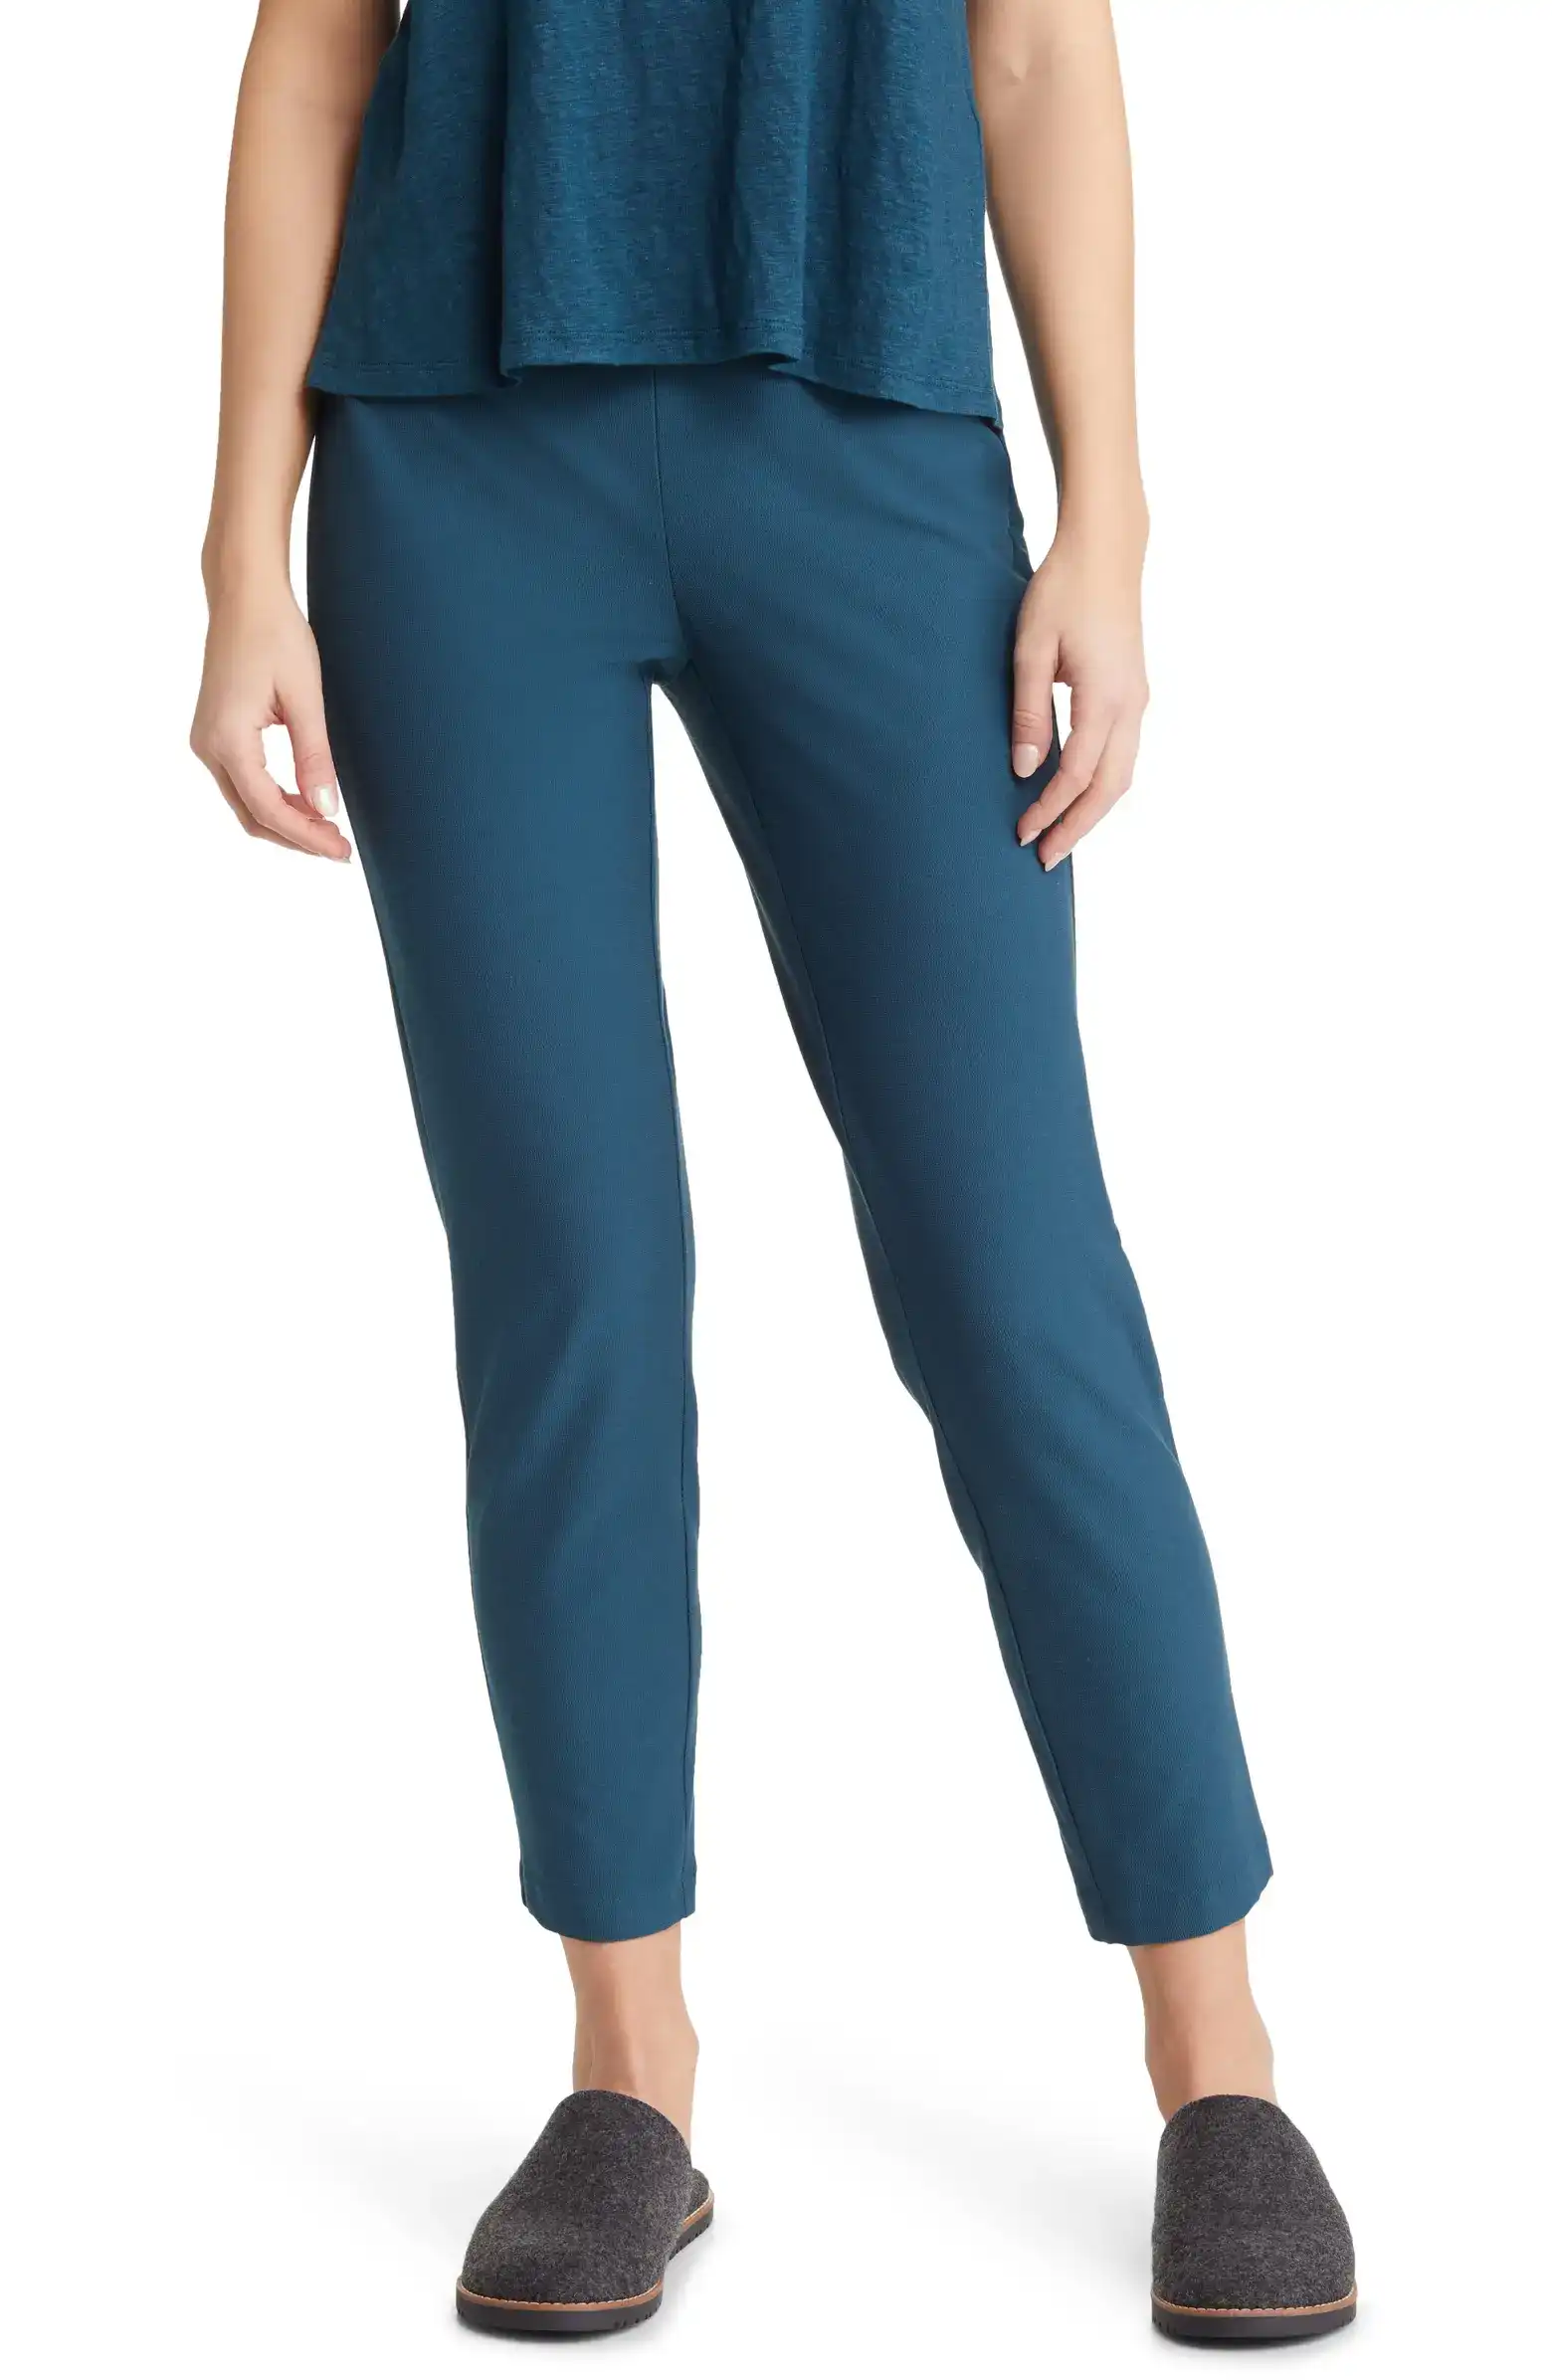 Eileen Fisher Slim Knit Ankle Pants